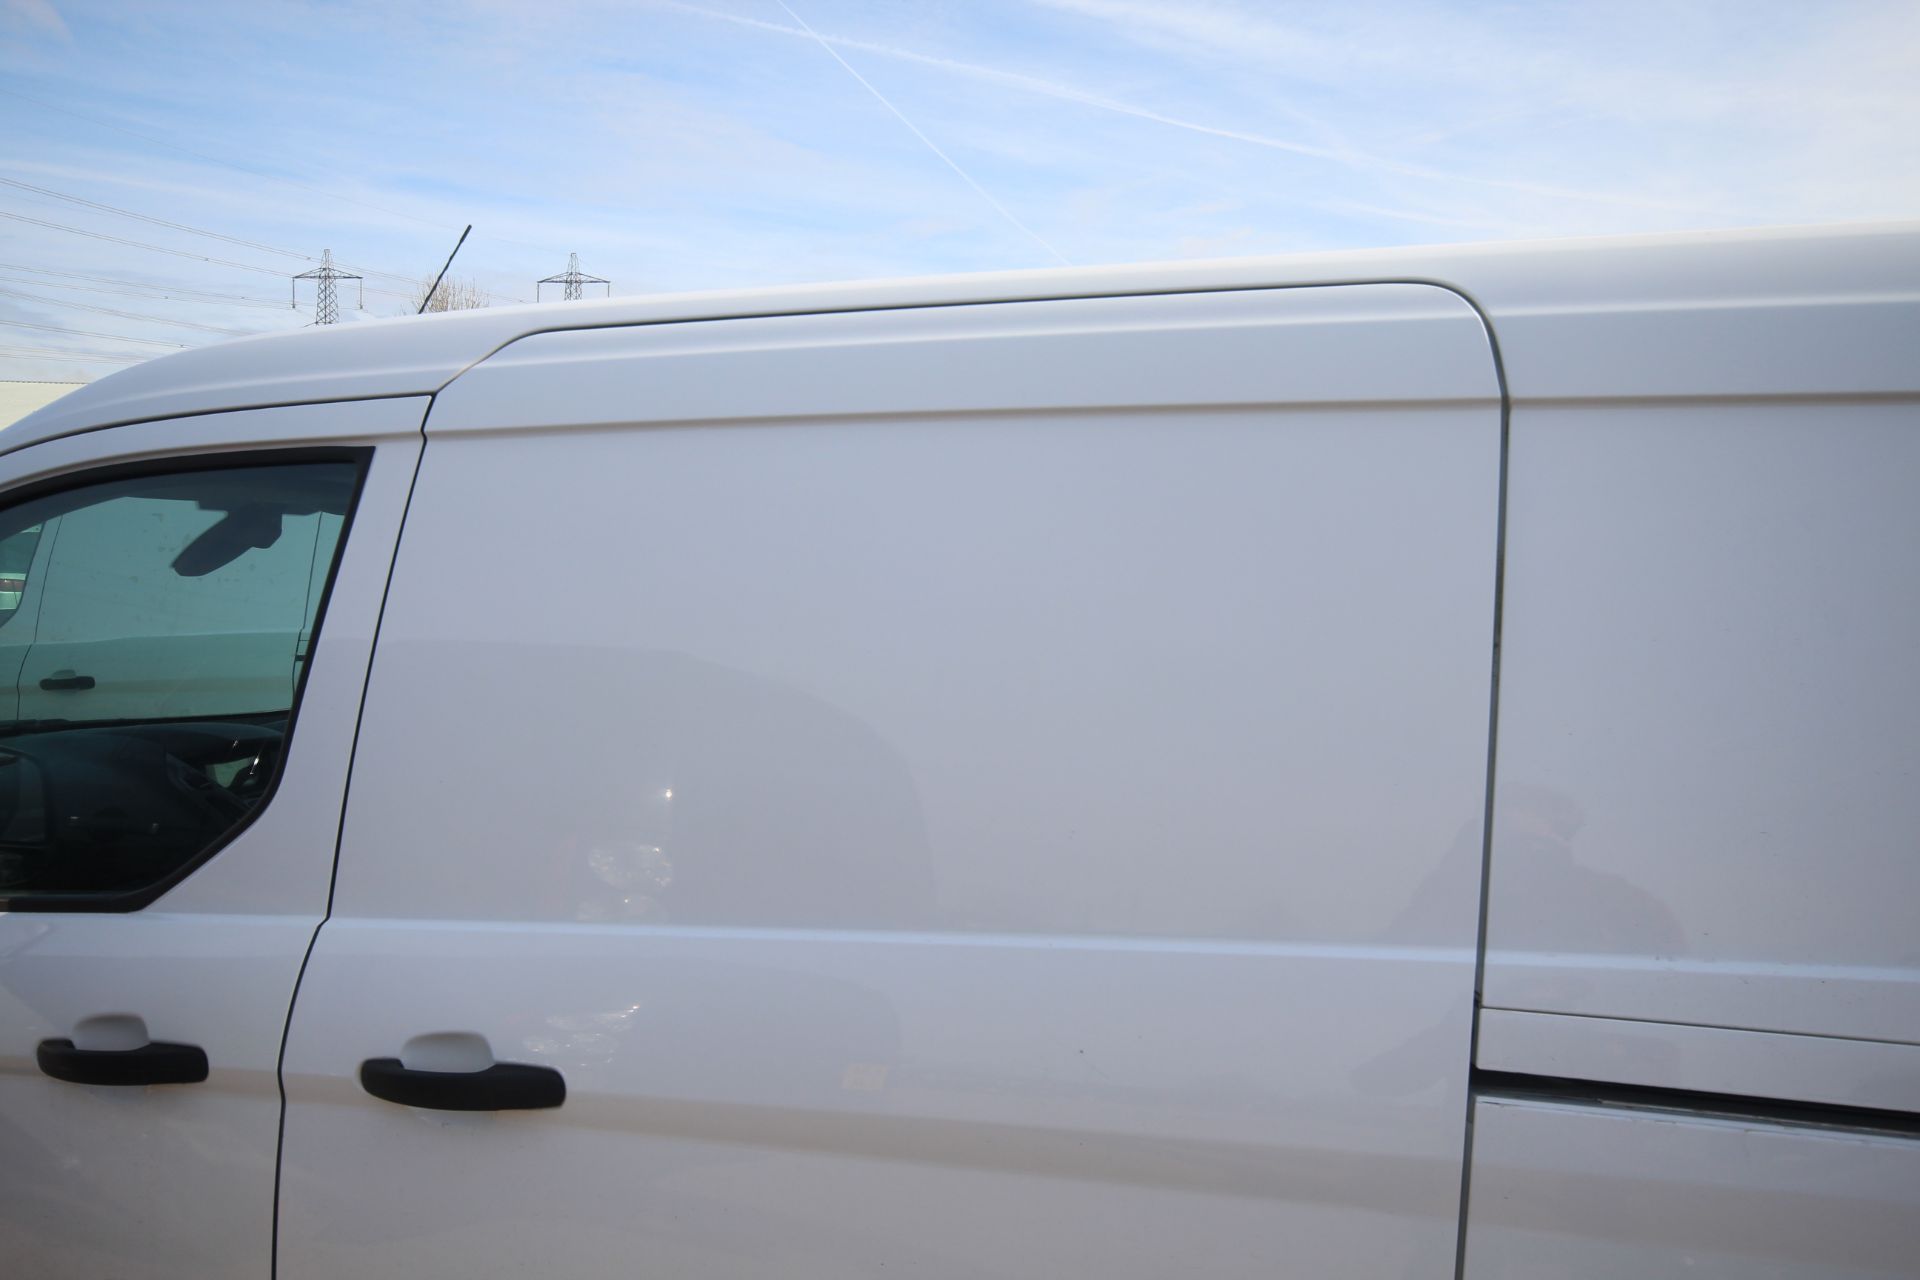 Ford Transit Connect 1.5L diesel crew cab van. Registration FD66 YUN. Date of first registration - Image 25 of 56